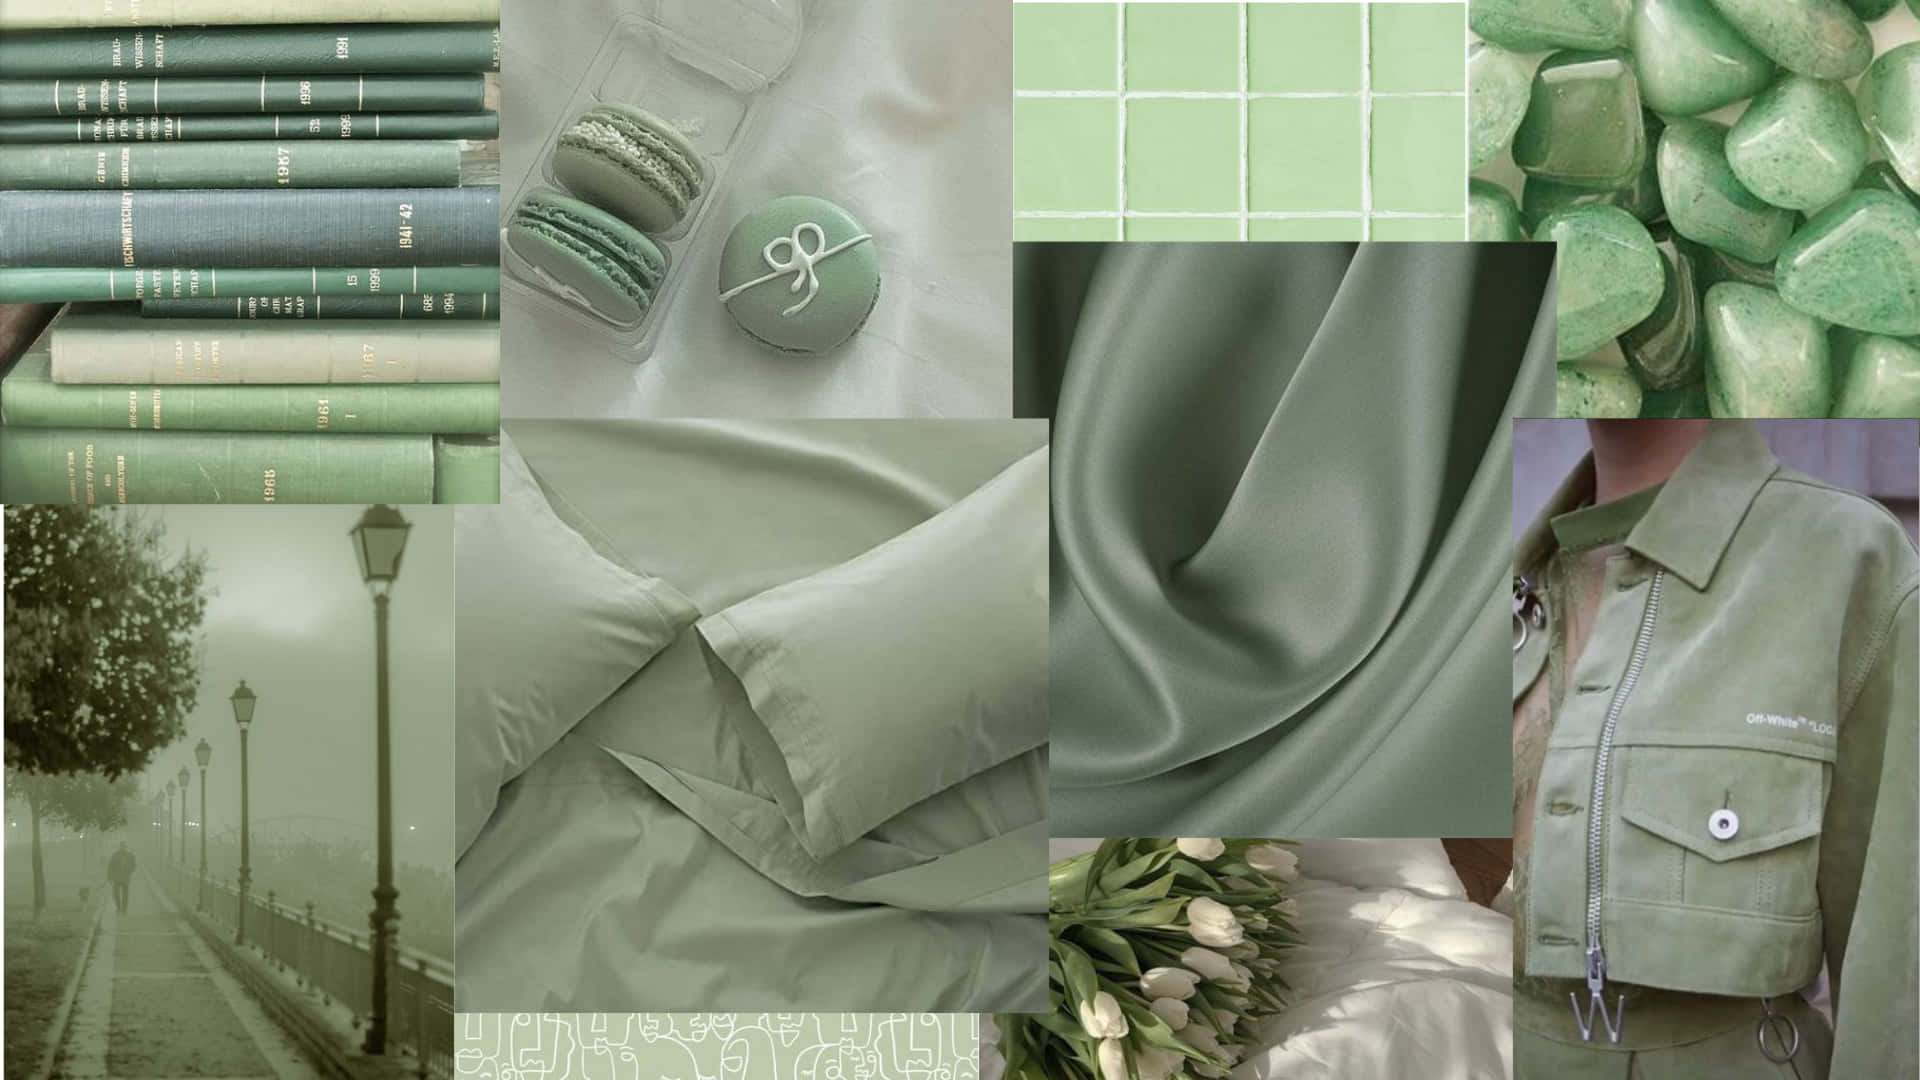 A soothing sage green wall color that creates a relaxed, peaceful atmosphere.